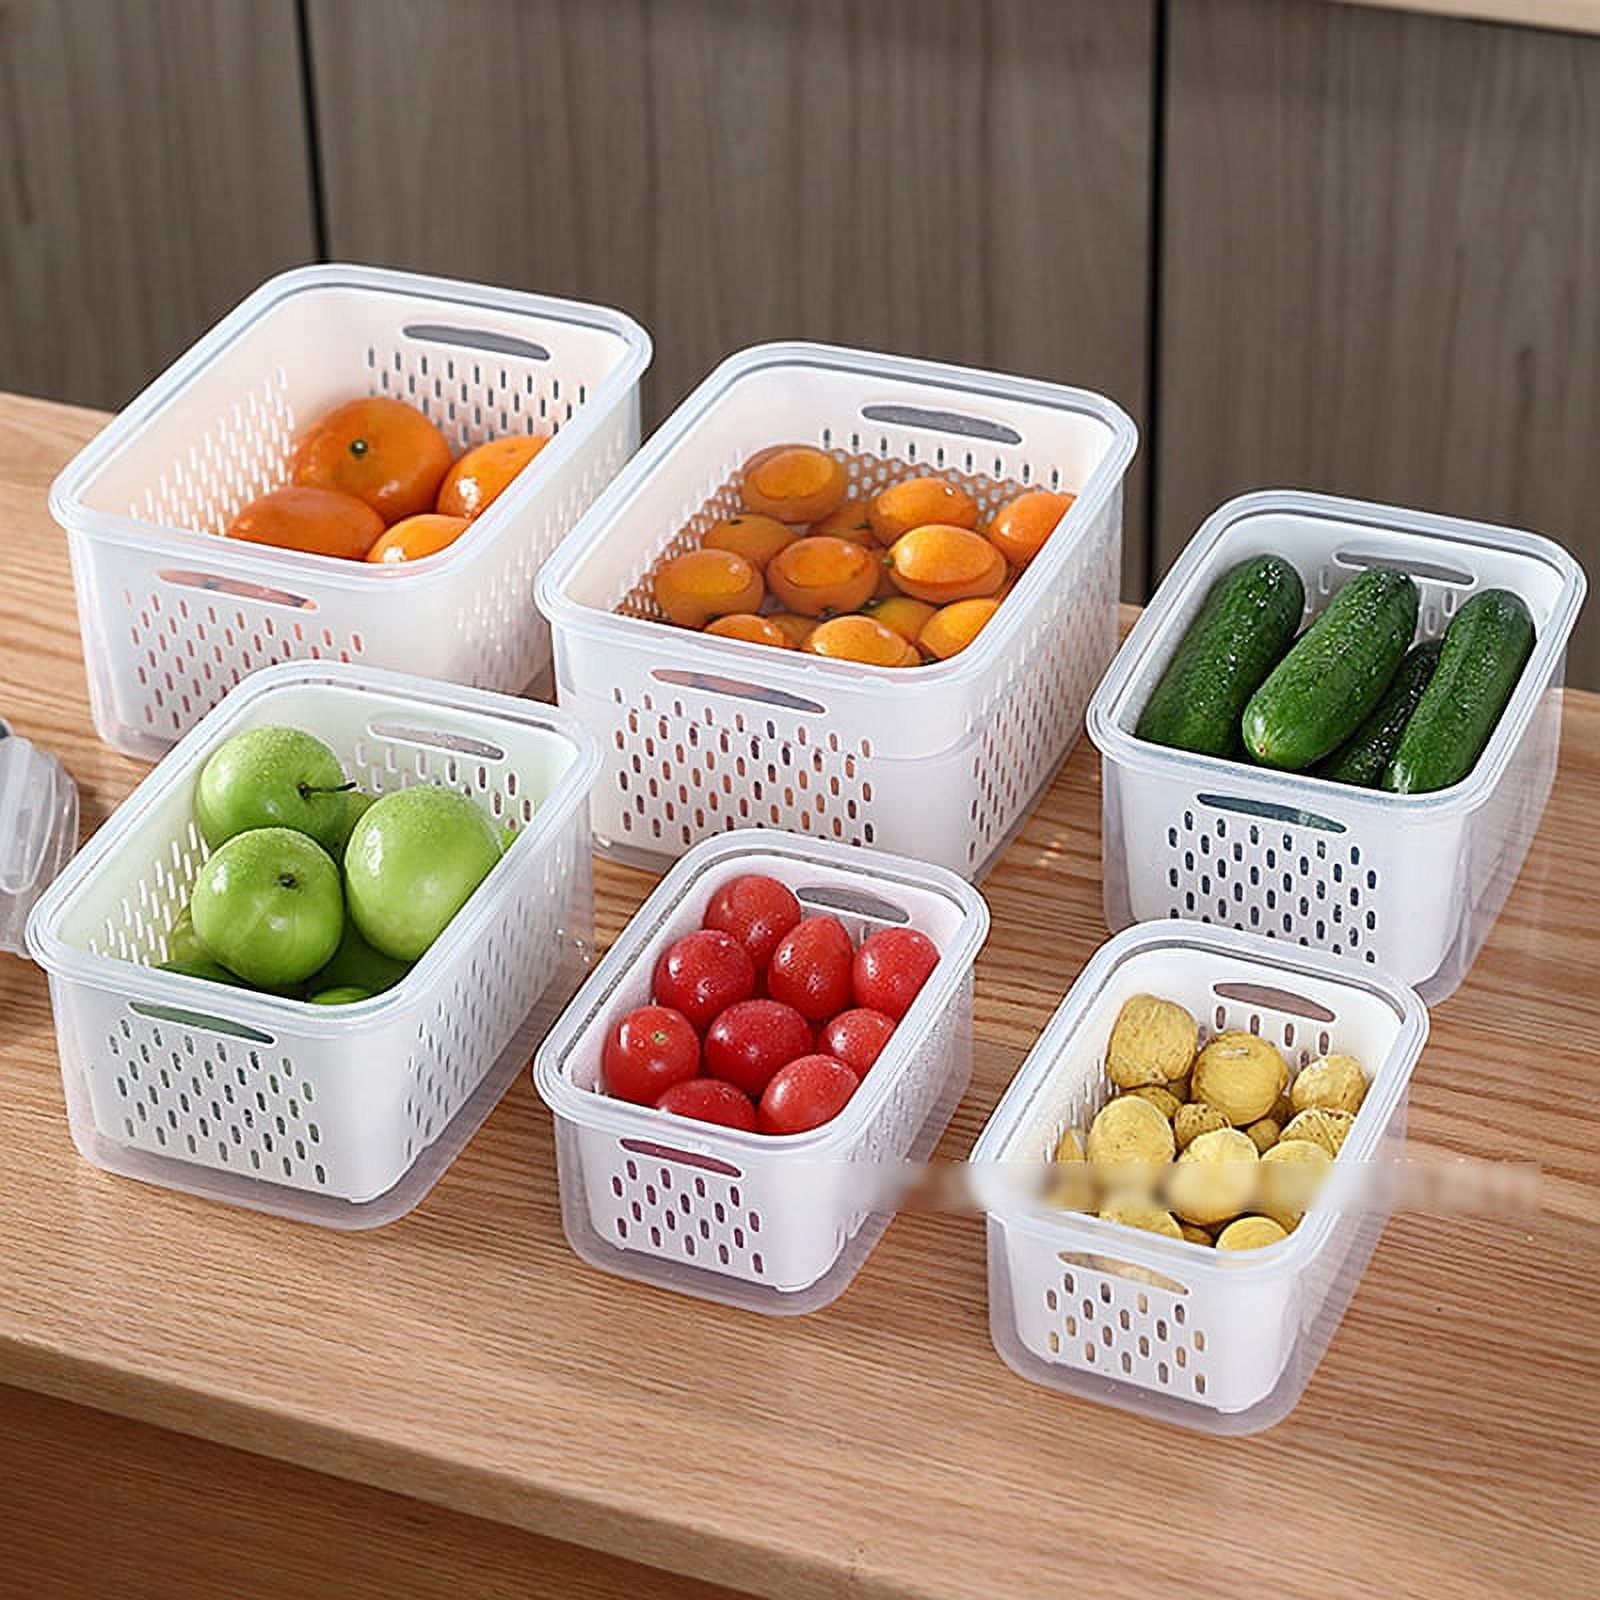 Slopehill Vegetable Fruit Storage Containers for Refrigerator 3 Pack Produce Saver Fridge Organizer Bins with Divider Partitioned Salad Container, Size: Small